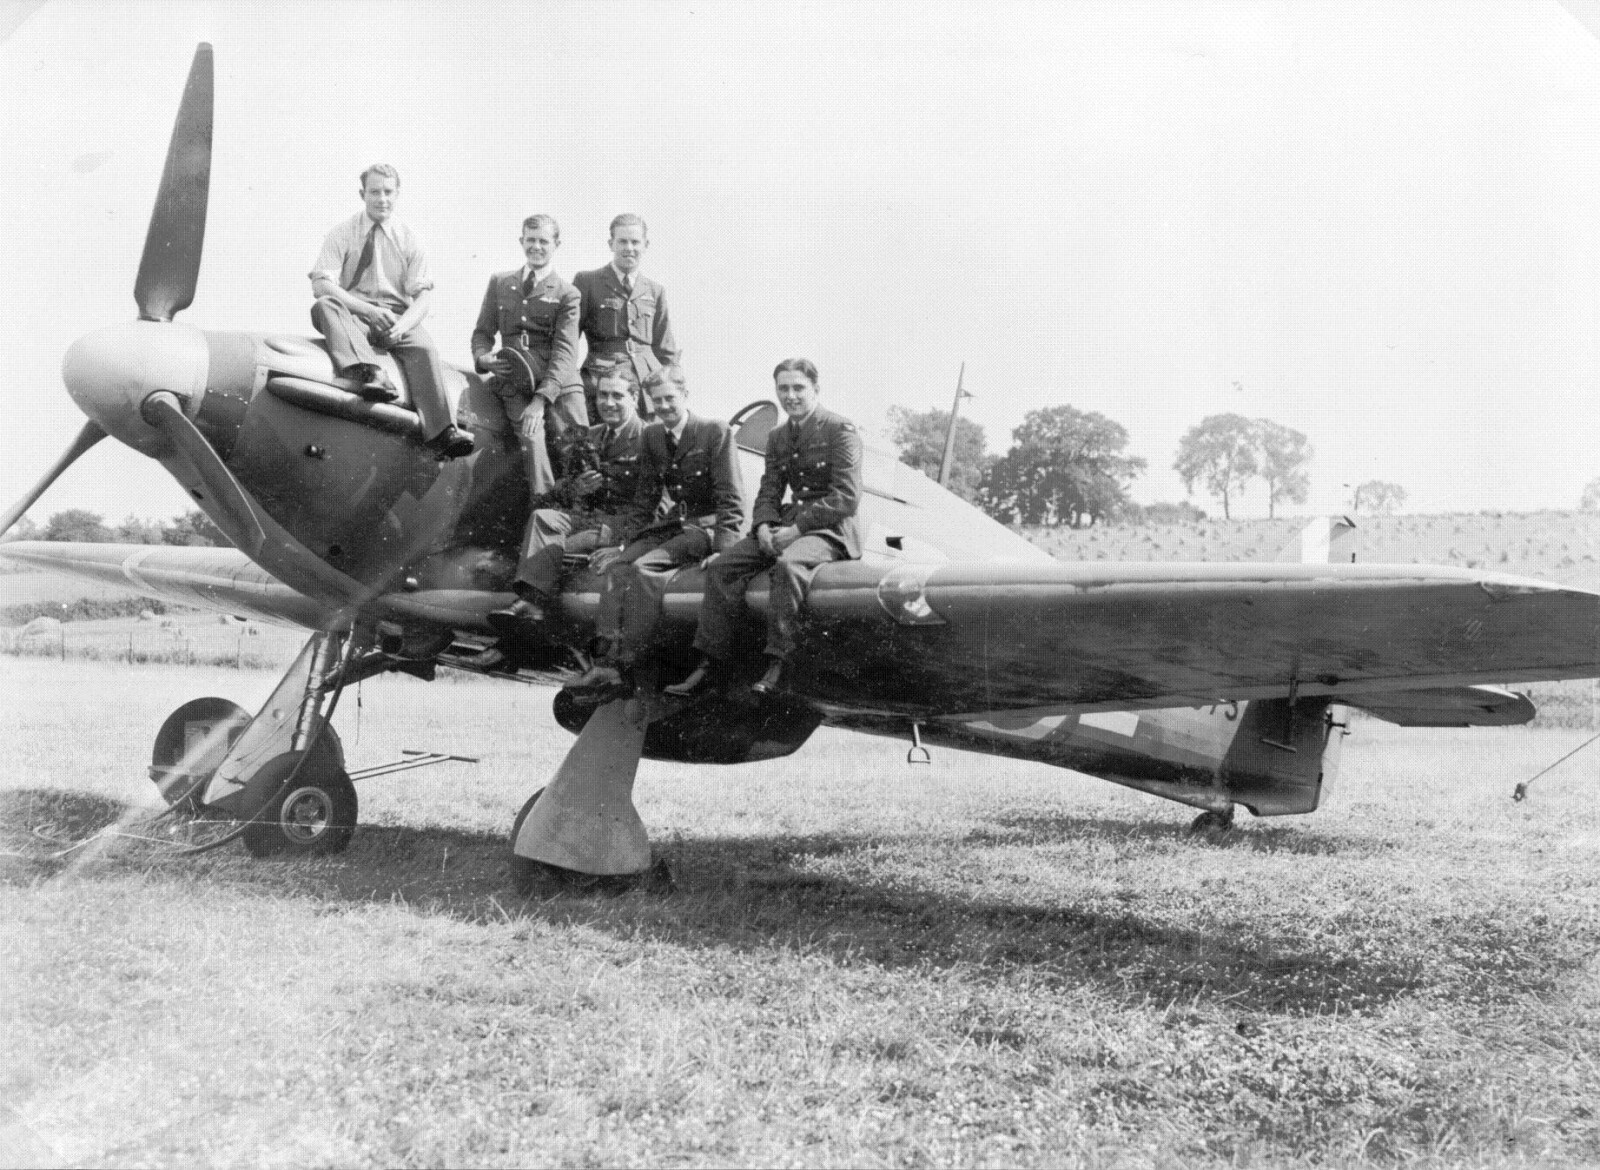 Griffiths (right) and other members of his squadron on a Hurricane.